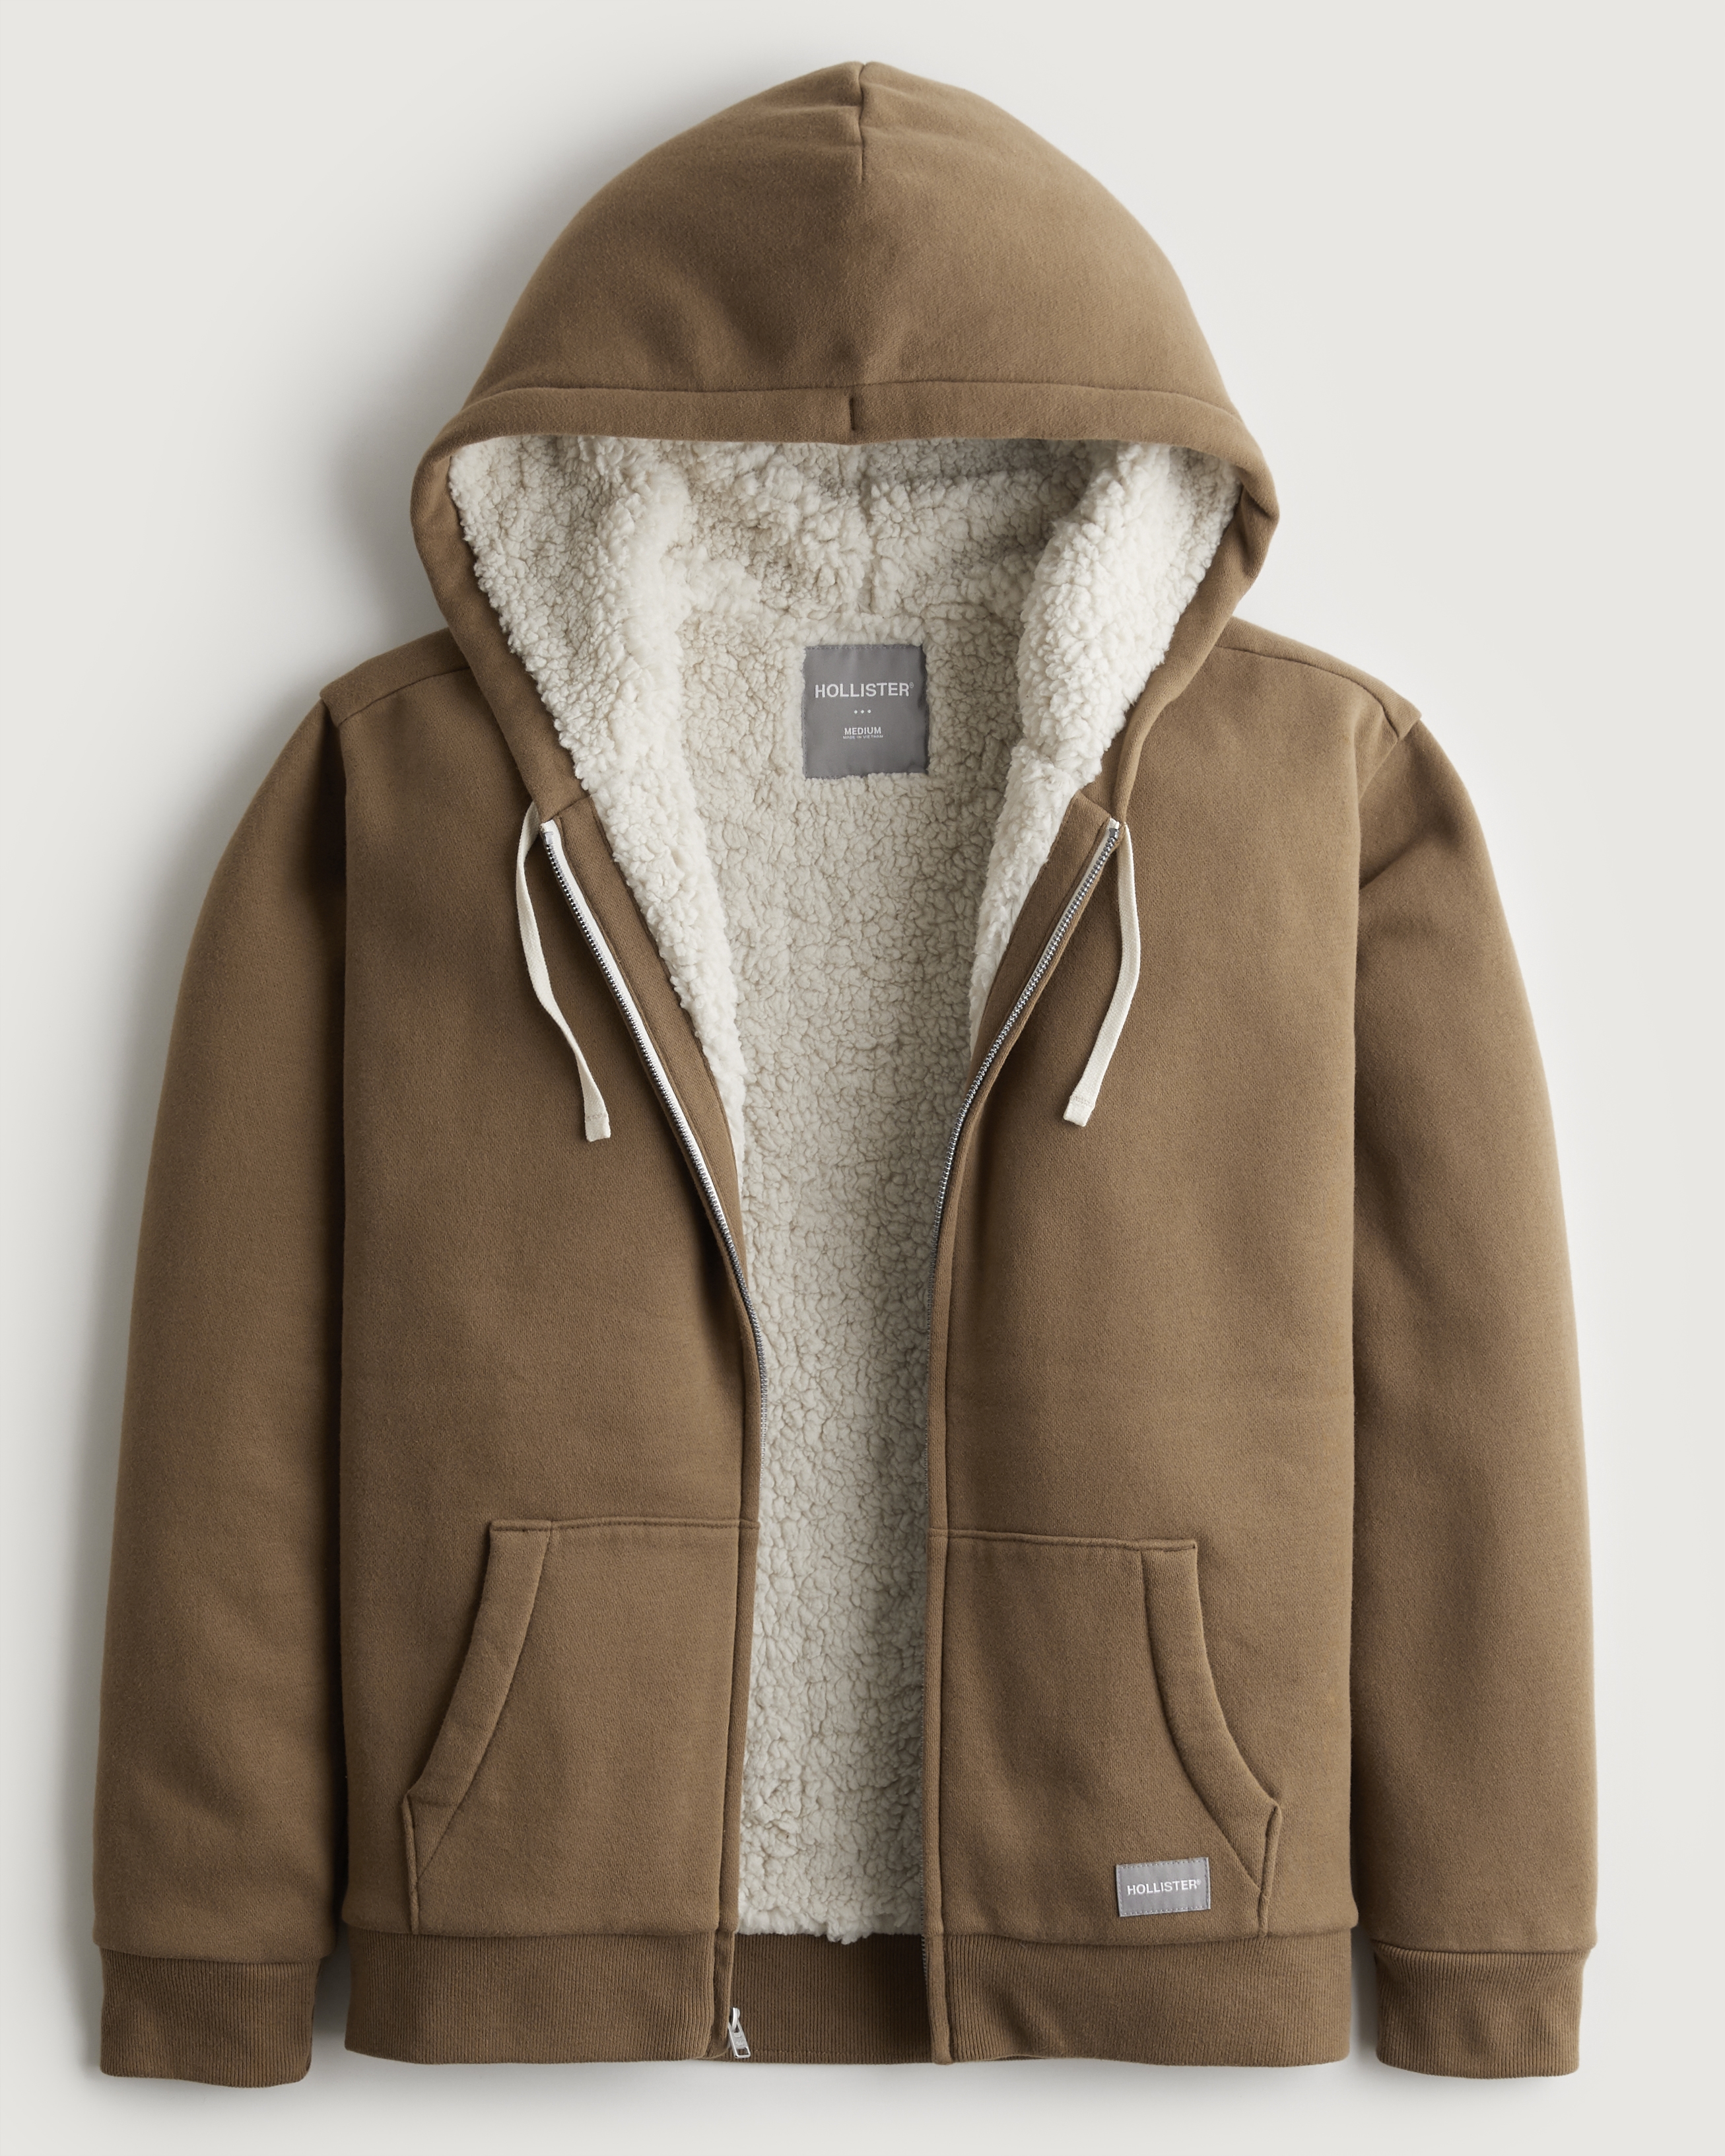 Hollister Sherpa-Lined Full-Zip Hoodie Halifax Shopping, 48% OFF